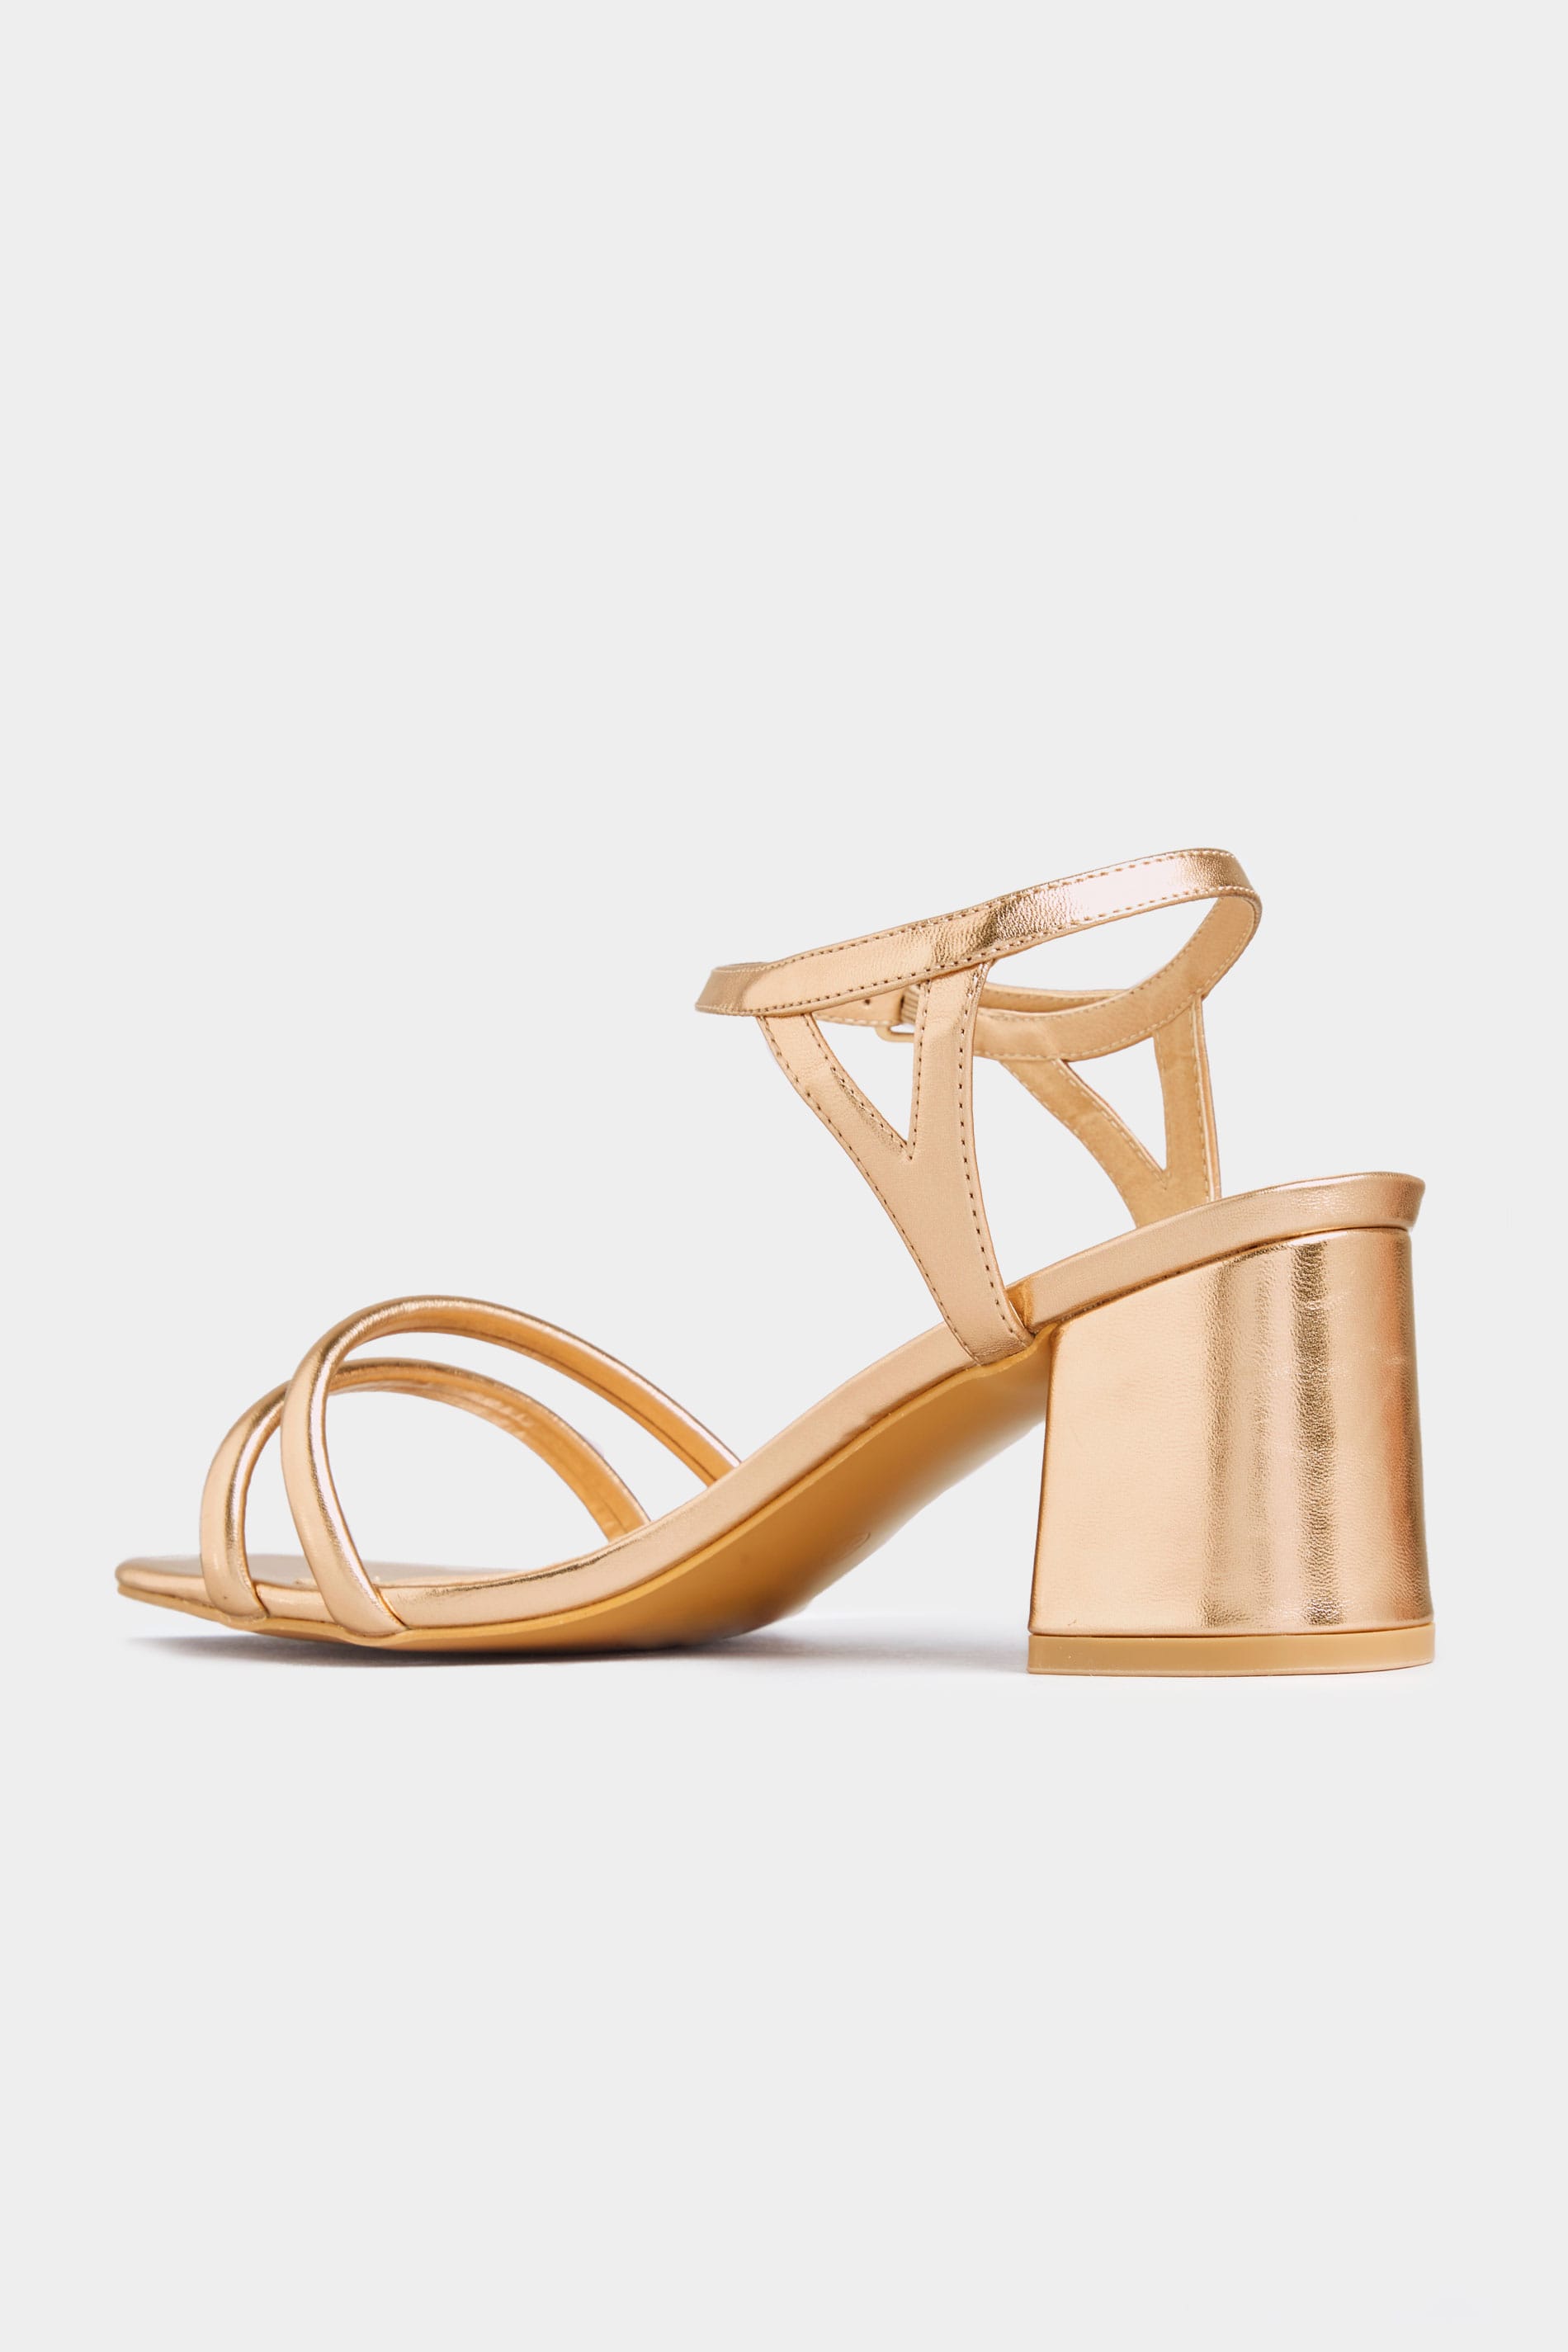 LIMITED COLLECTION Gold Double Strap Heeled Sandals In Extra Wide Fit ...